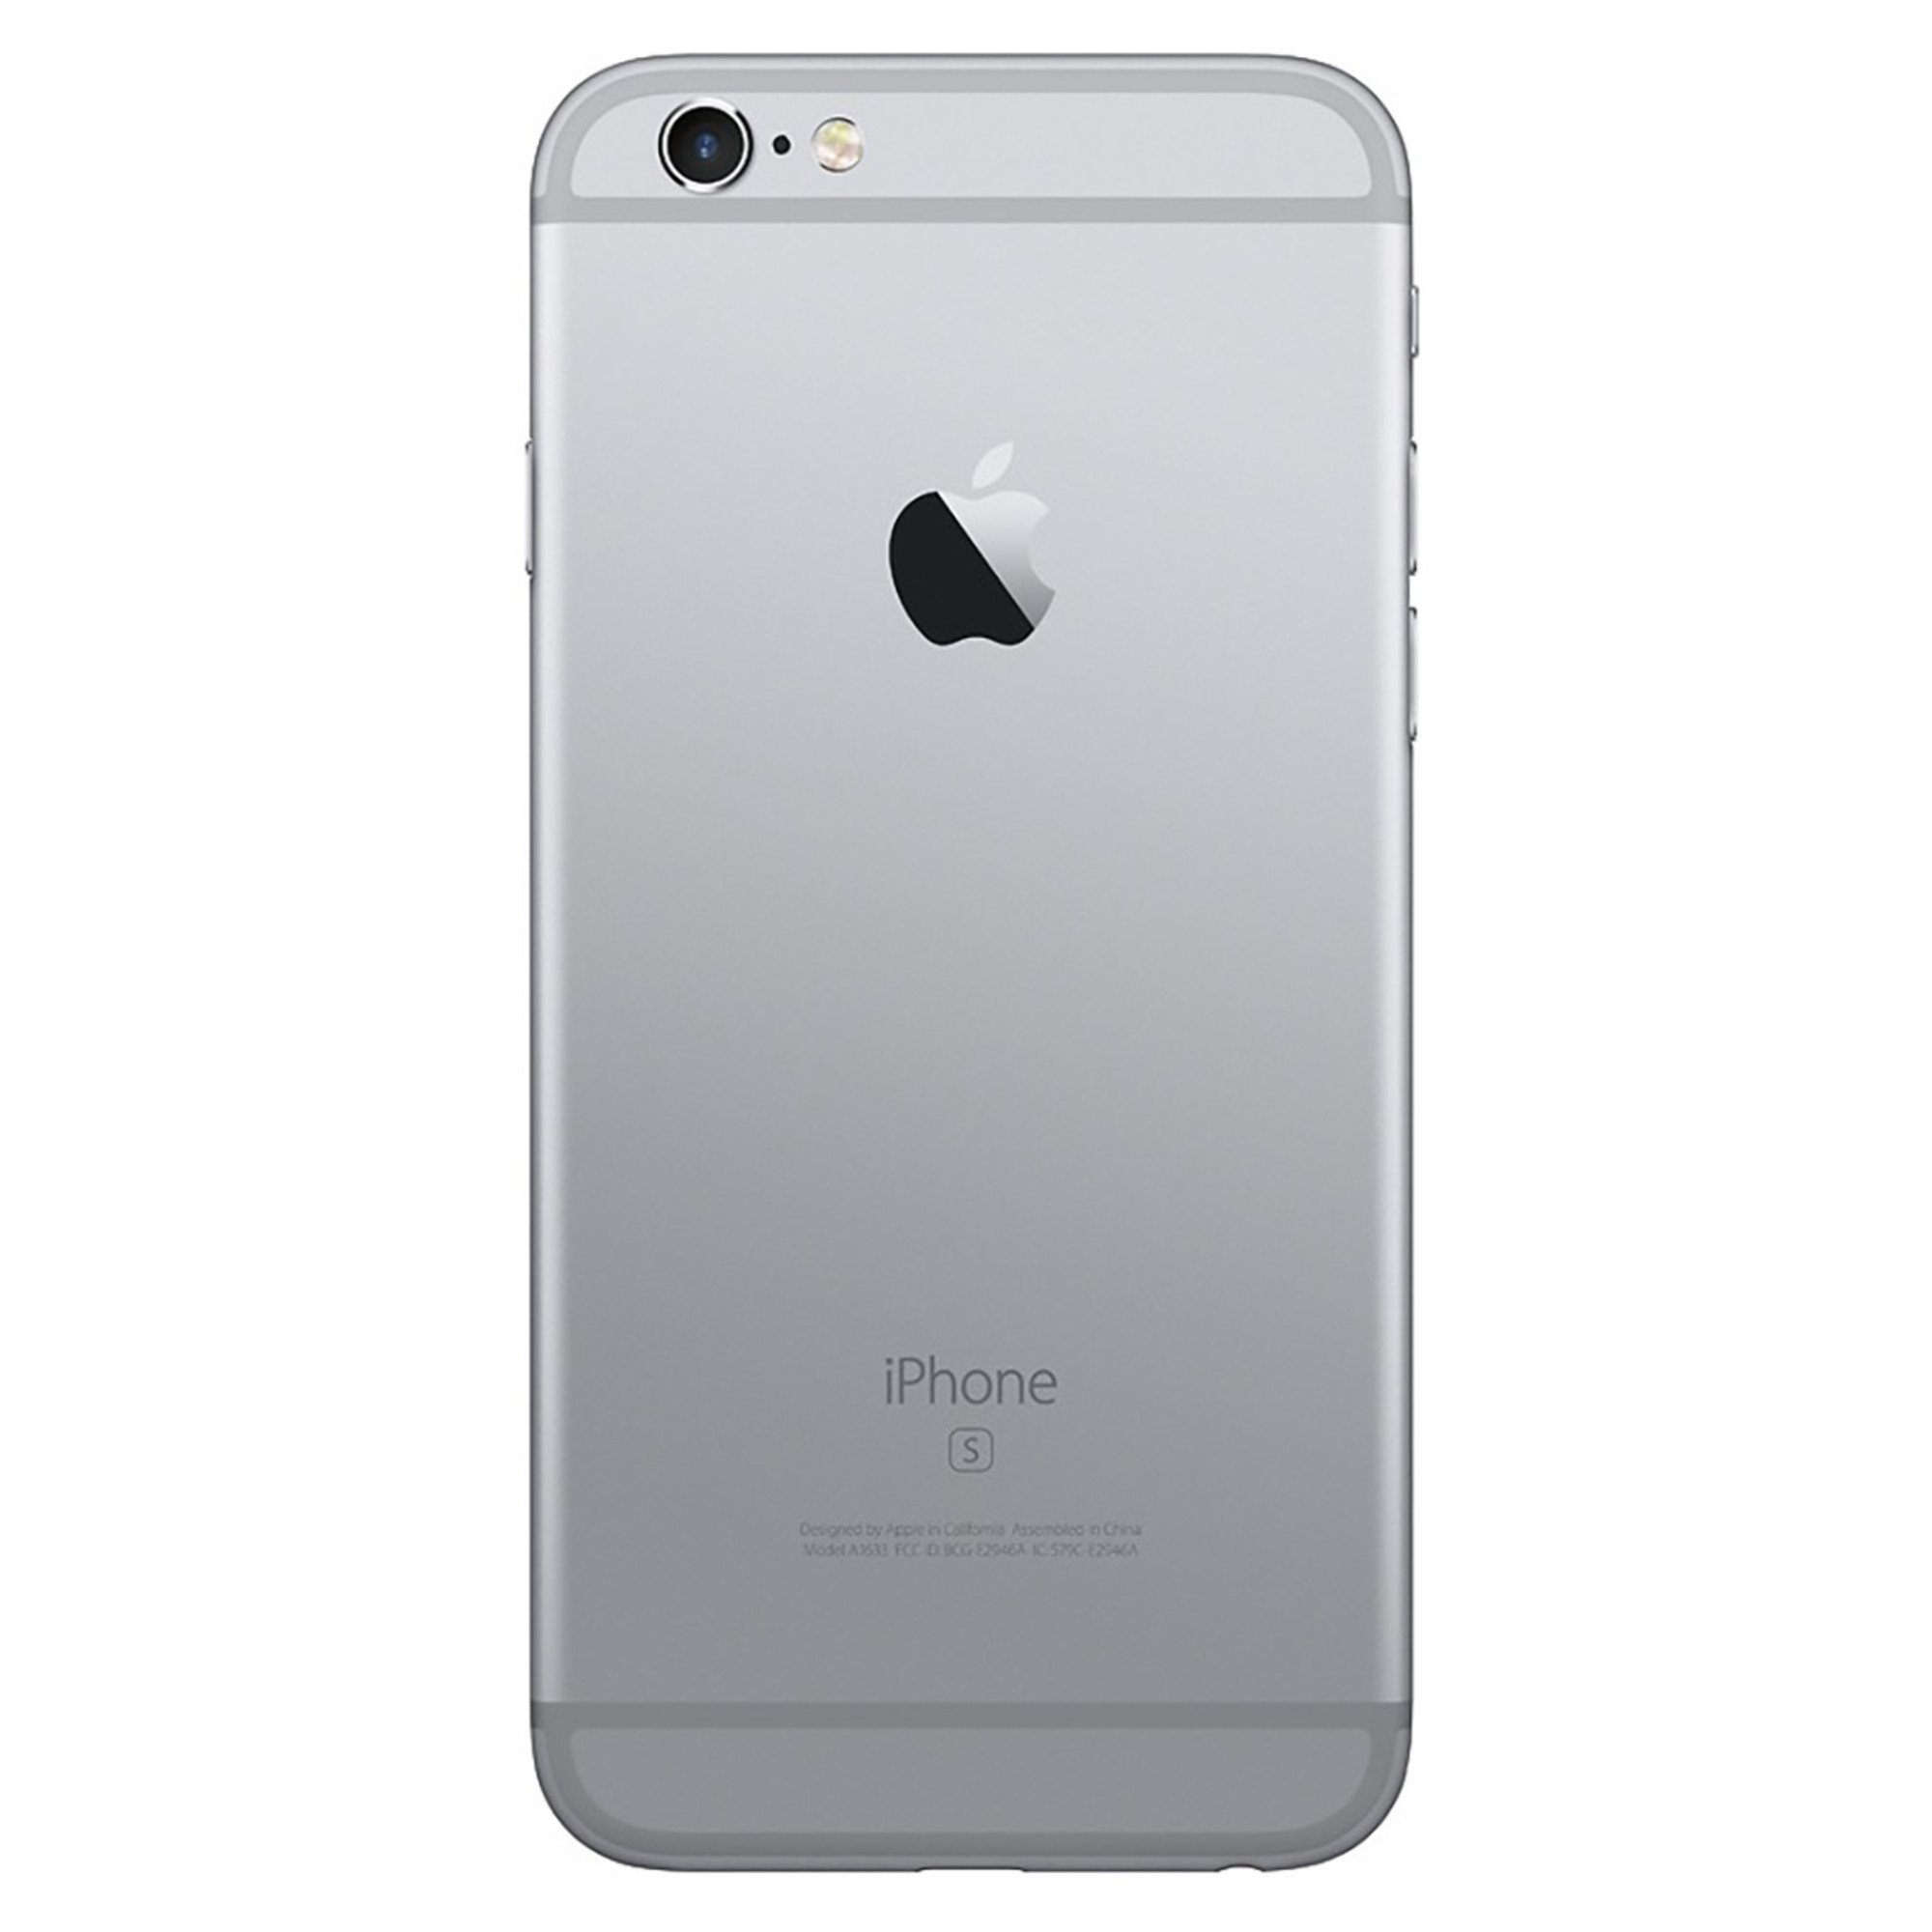 Apple iPhone 6s 64GB GSM Phone - Space Gray (Used) + WeCare Alcohol Wipes Pack (50 Wipes) - image 4 of 6